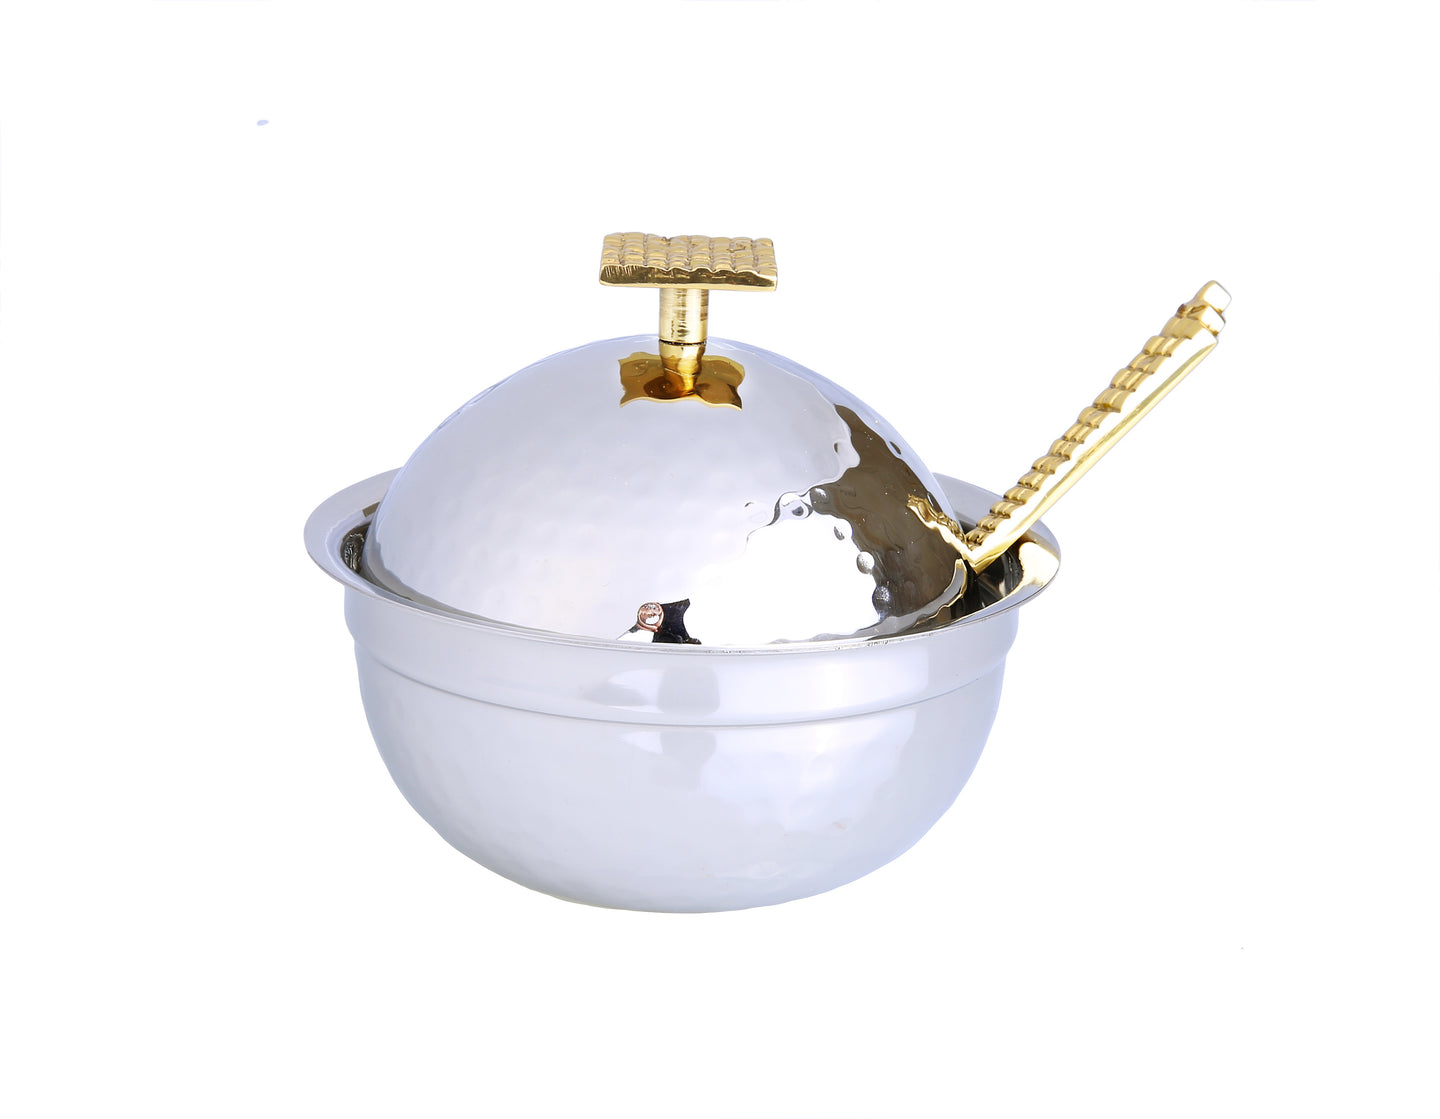 Stainless Steel Honey Dish With Mosaic Handle - 4.25